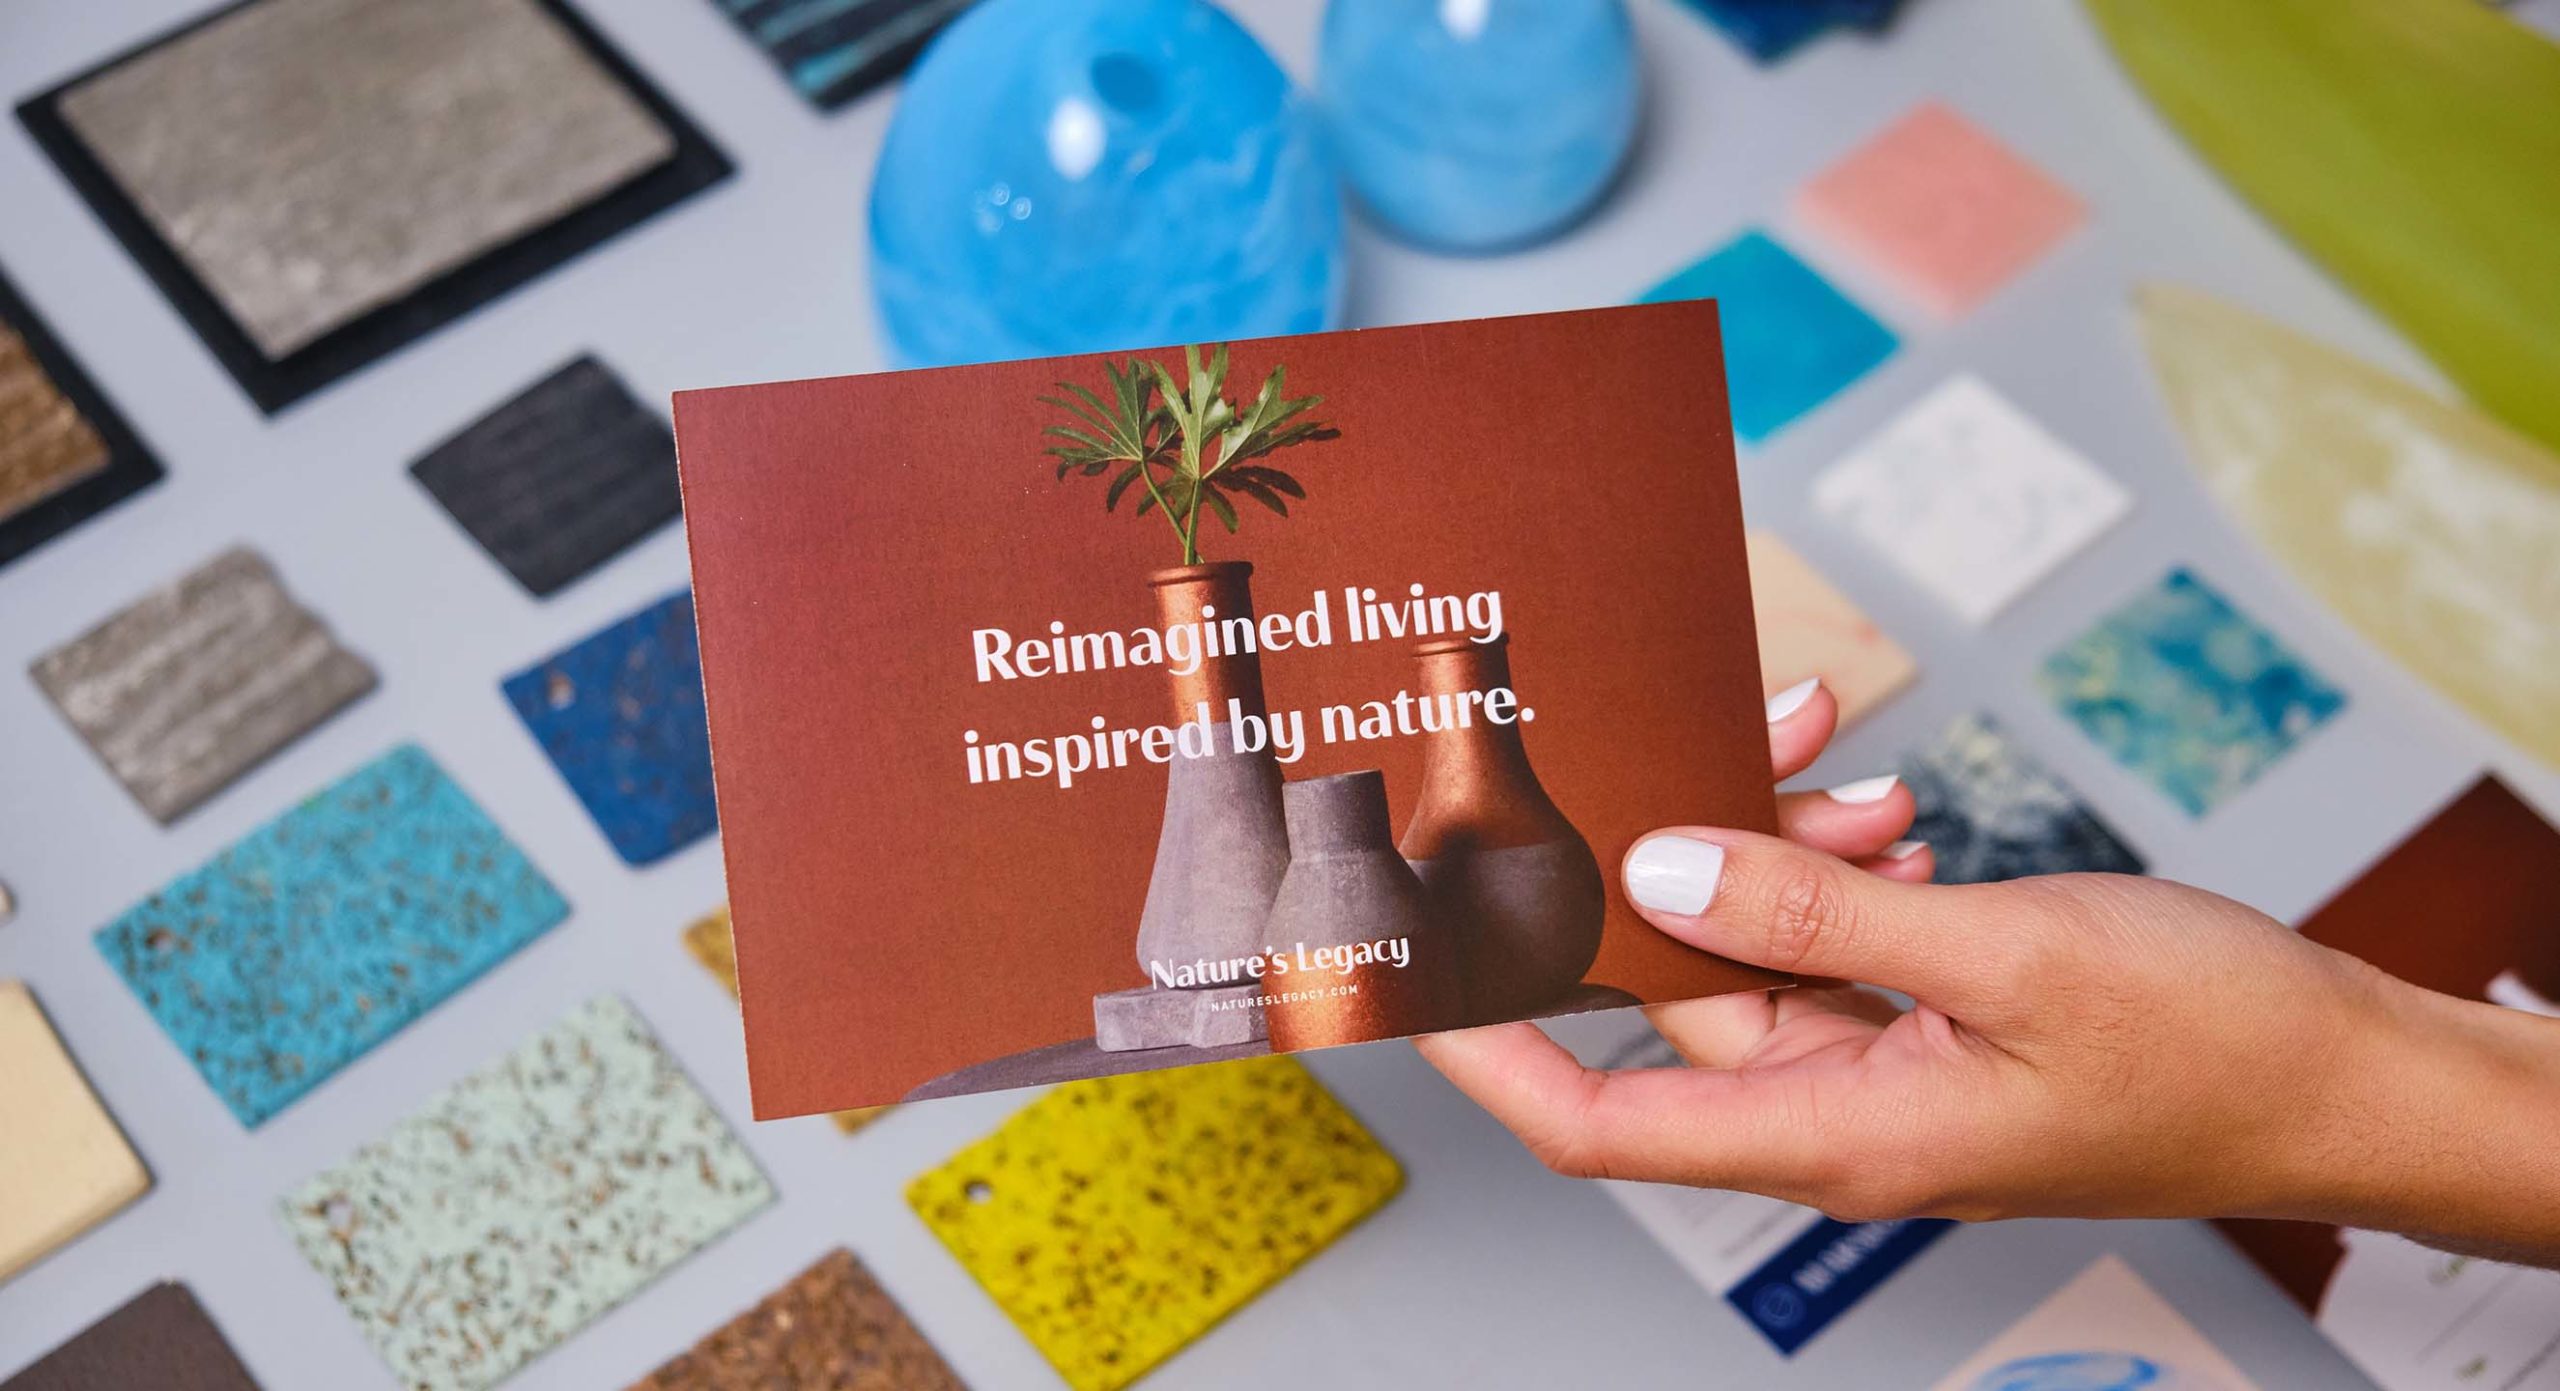 A hand holding a postcard for home and furniture brand Nature's Legacy